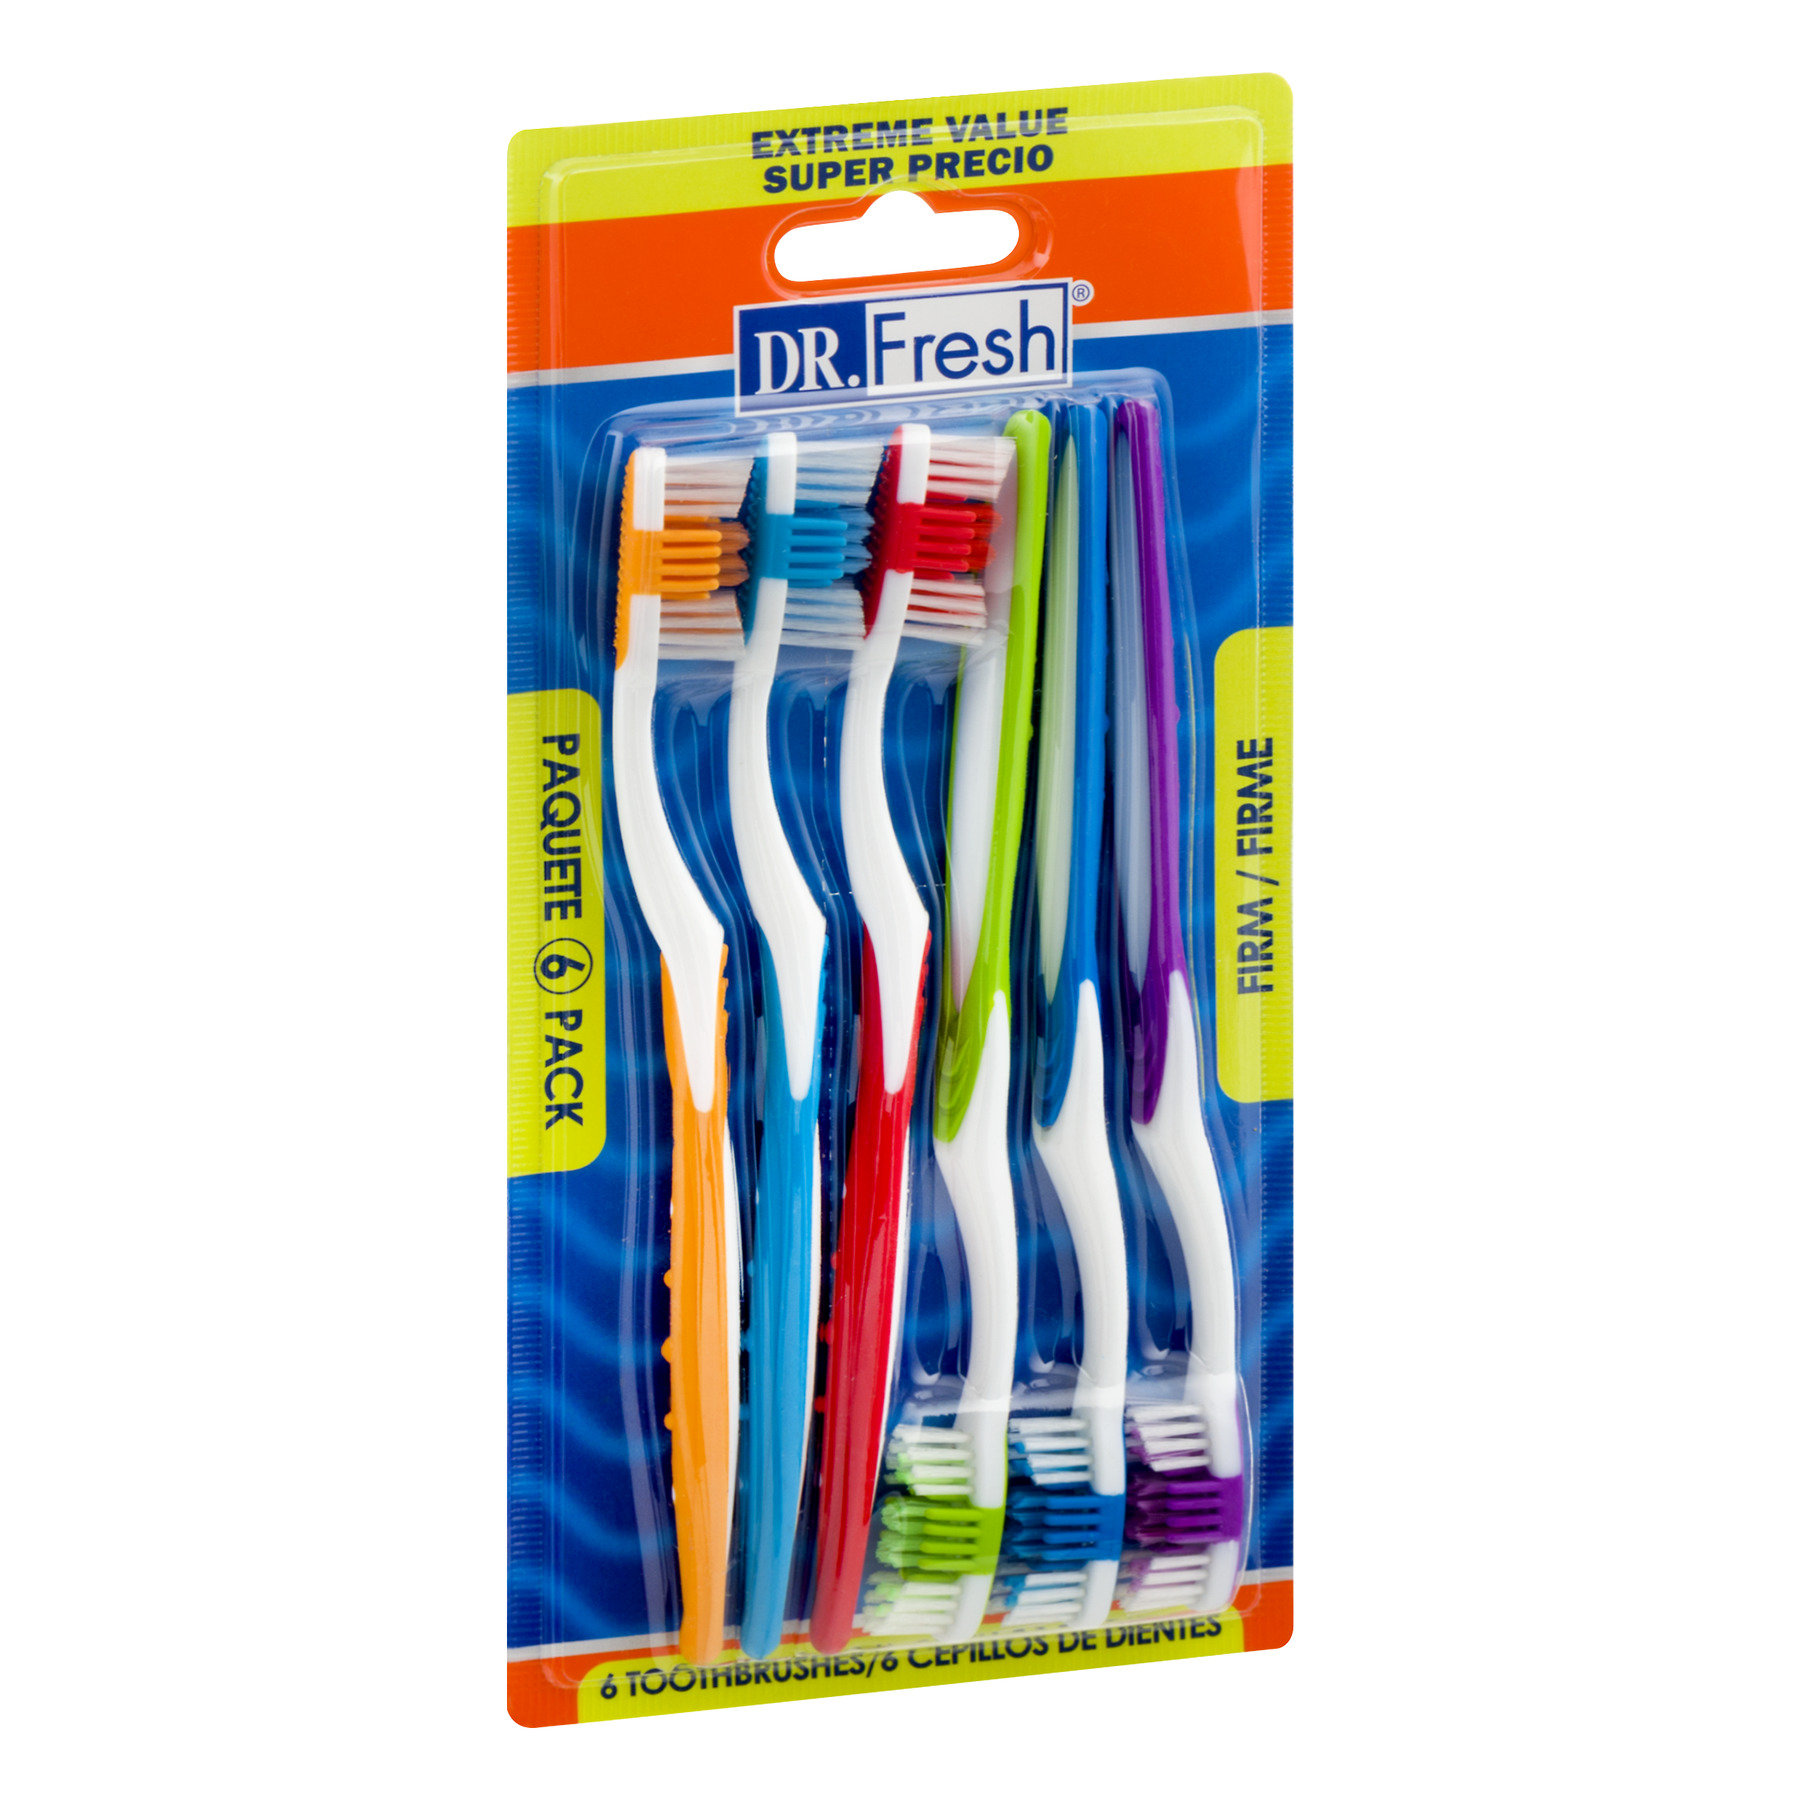 Dr. Fresh Dailies Toothbrushes, Firm, 6 Ct - image 5 of 5